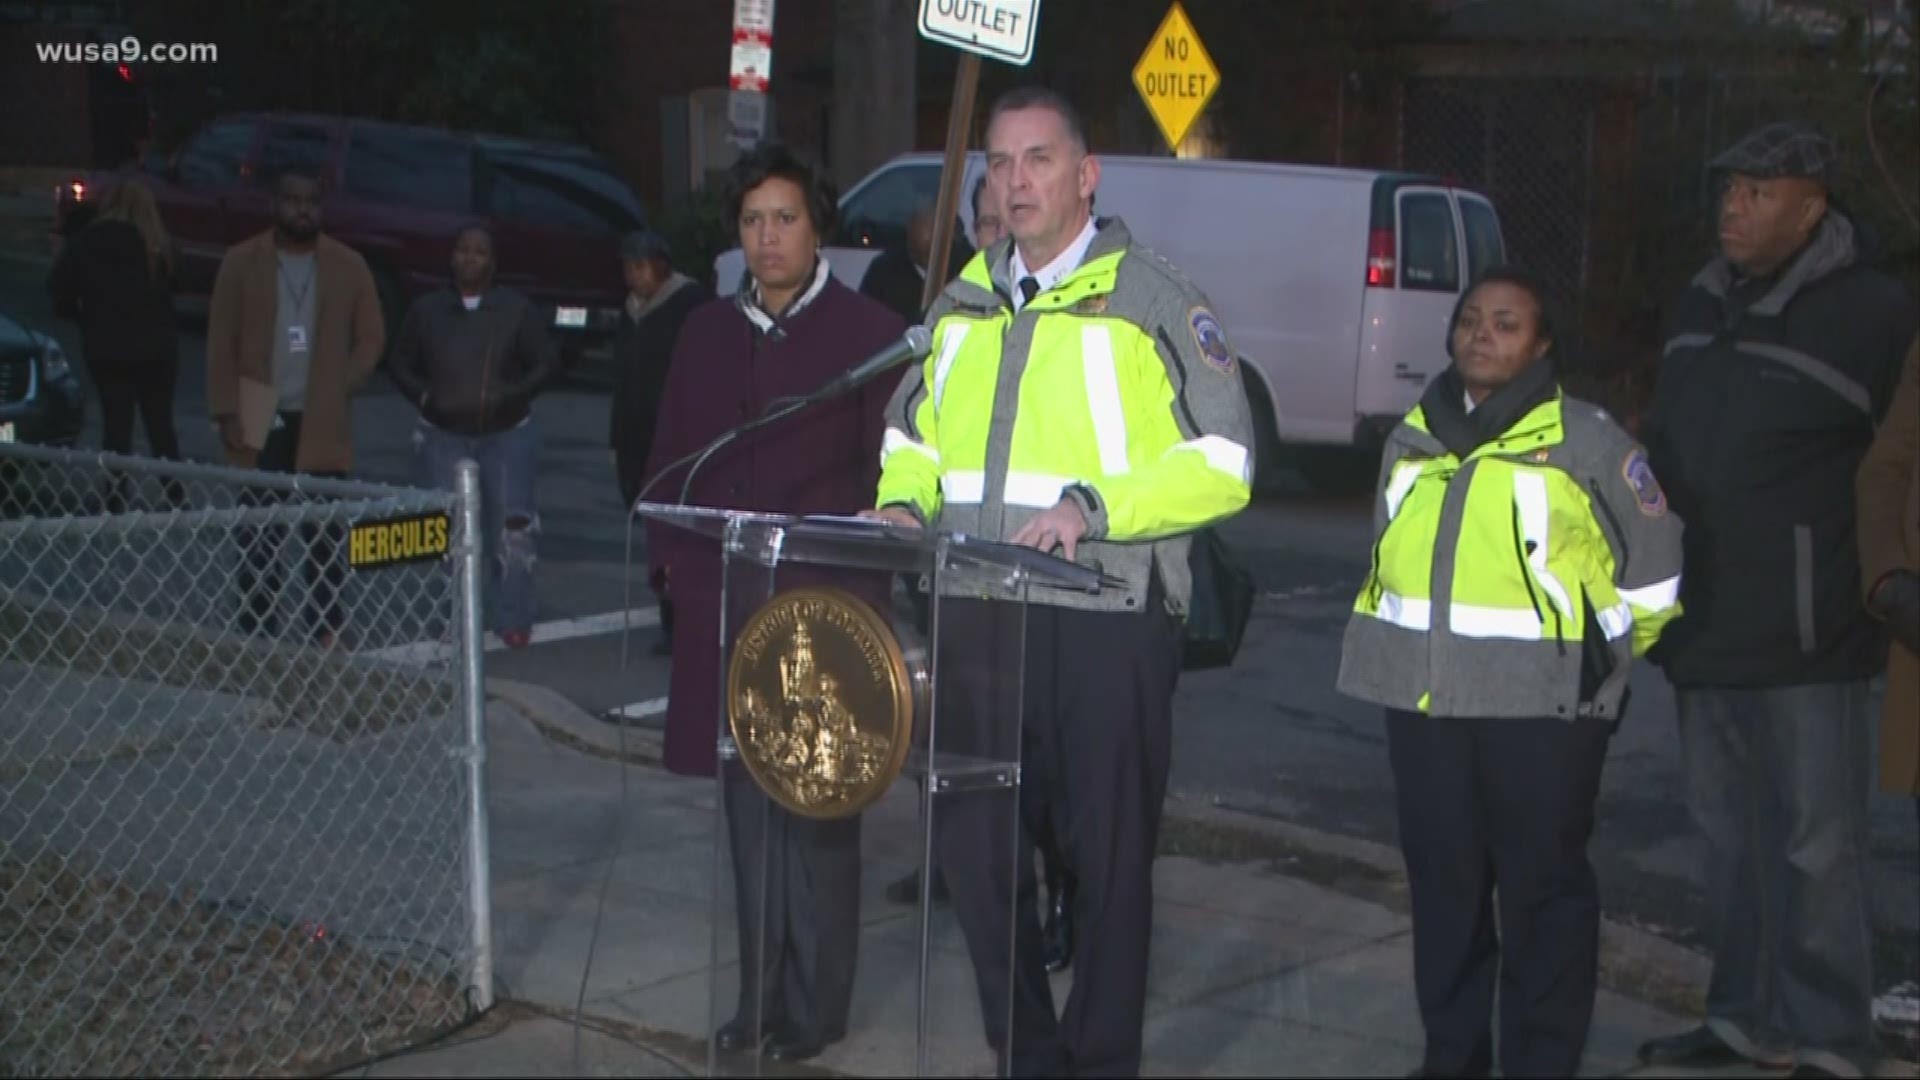 DC Police Chief Peter Newsham plans to announce even more crime prevention measures as the homicide wave from last year pushes into 2019.